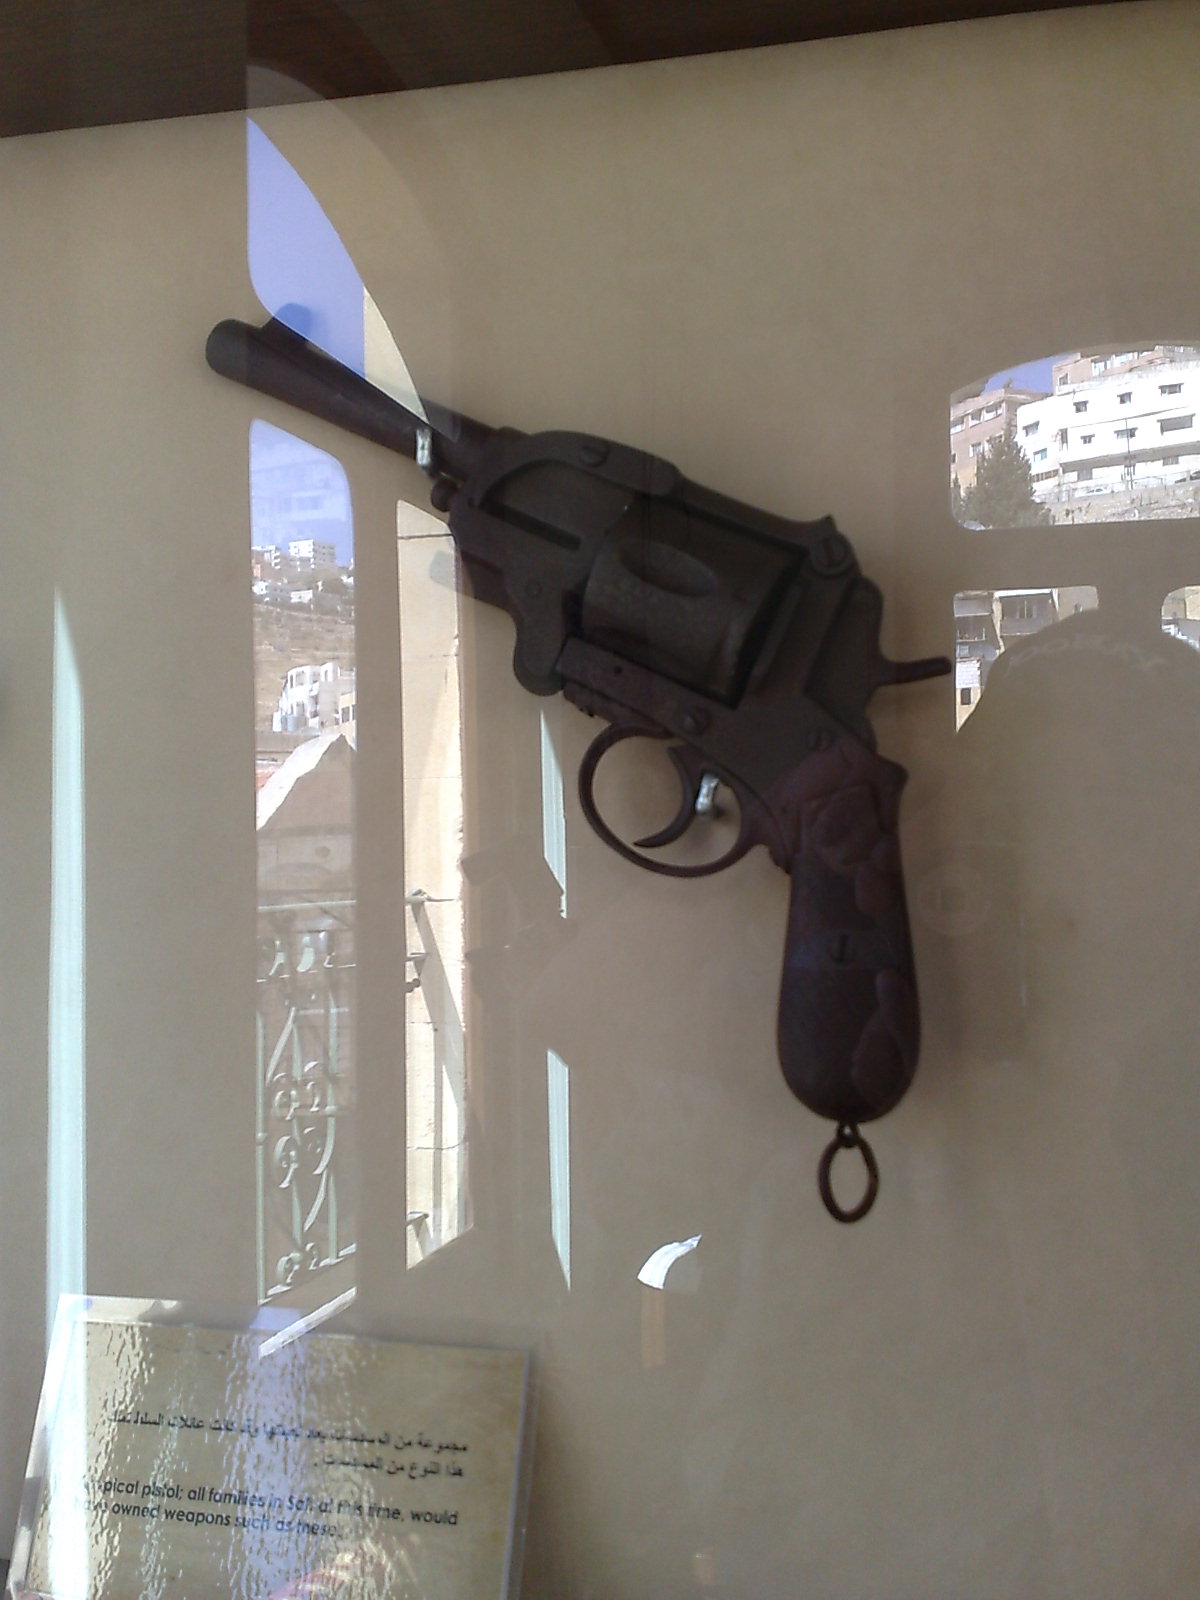 a fake gun is displayed on the wall